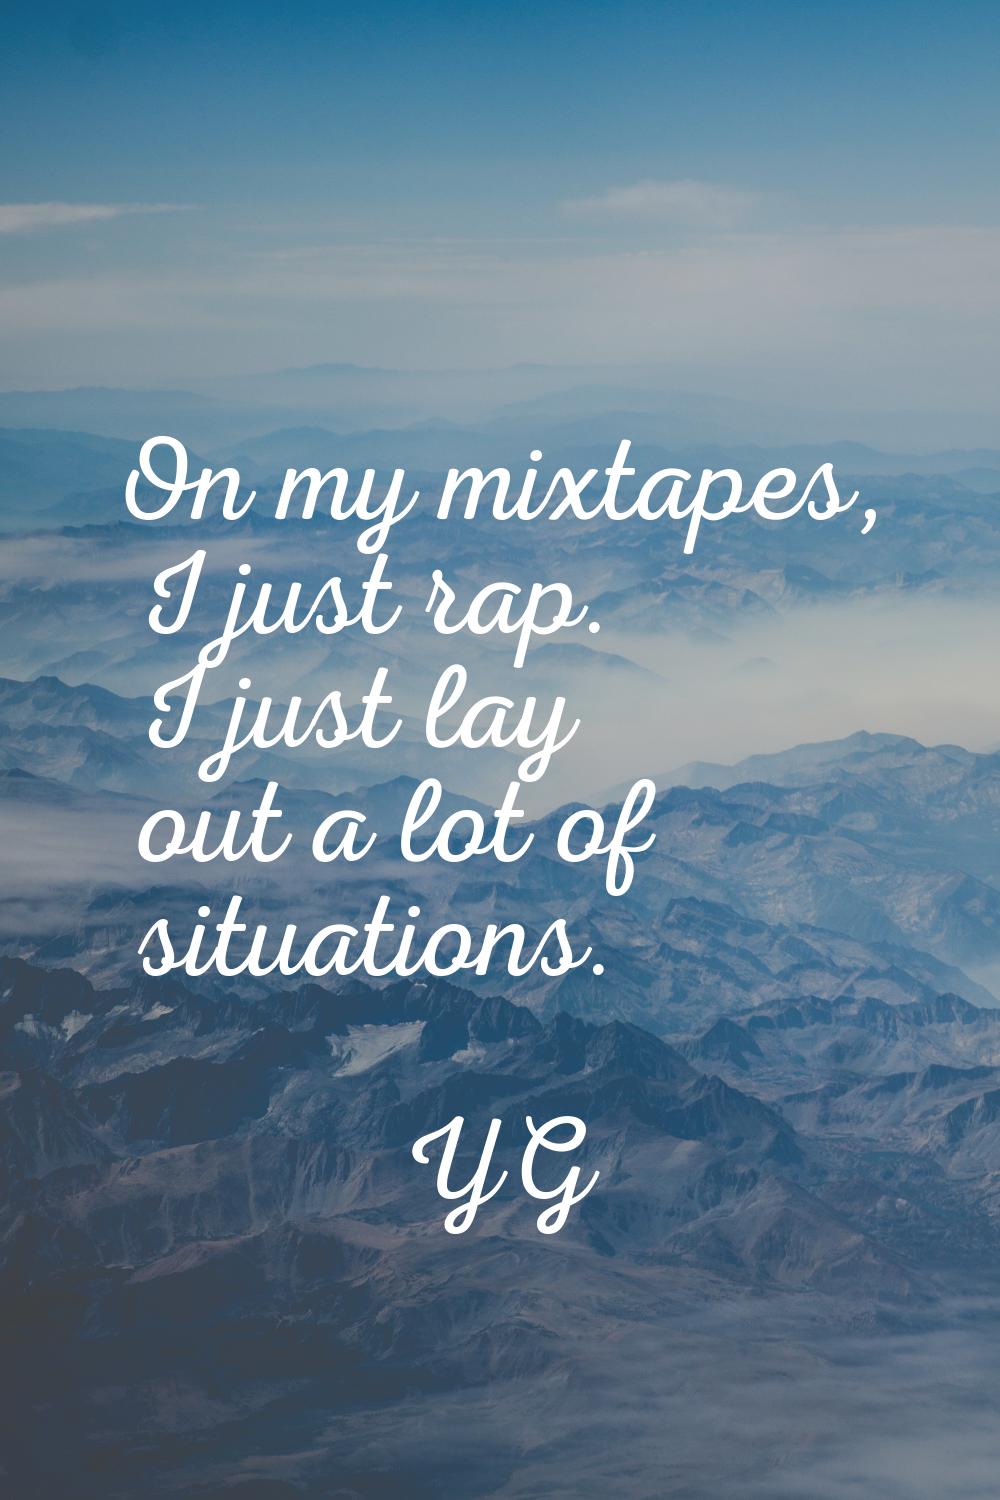 On my mixtapes, I just rap. I just lay out a lot of situations.